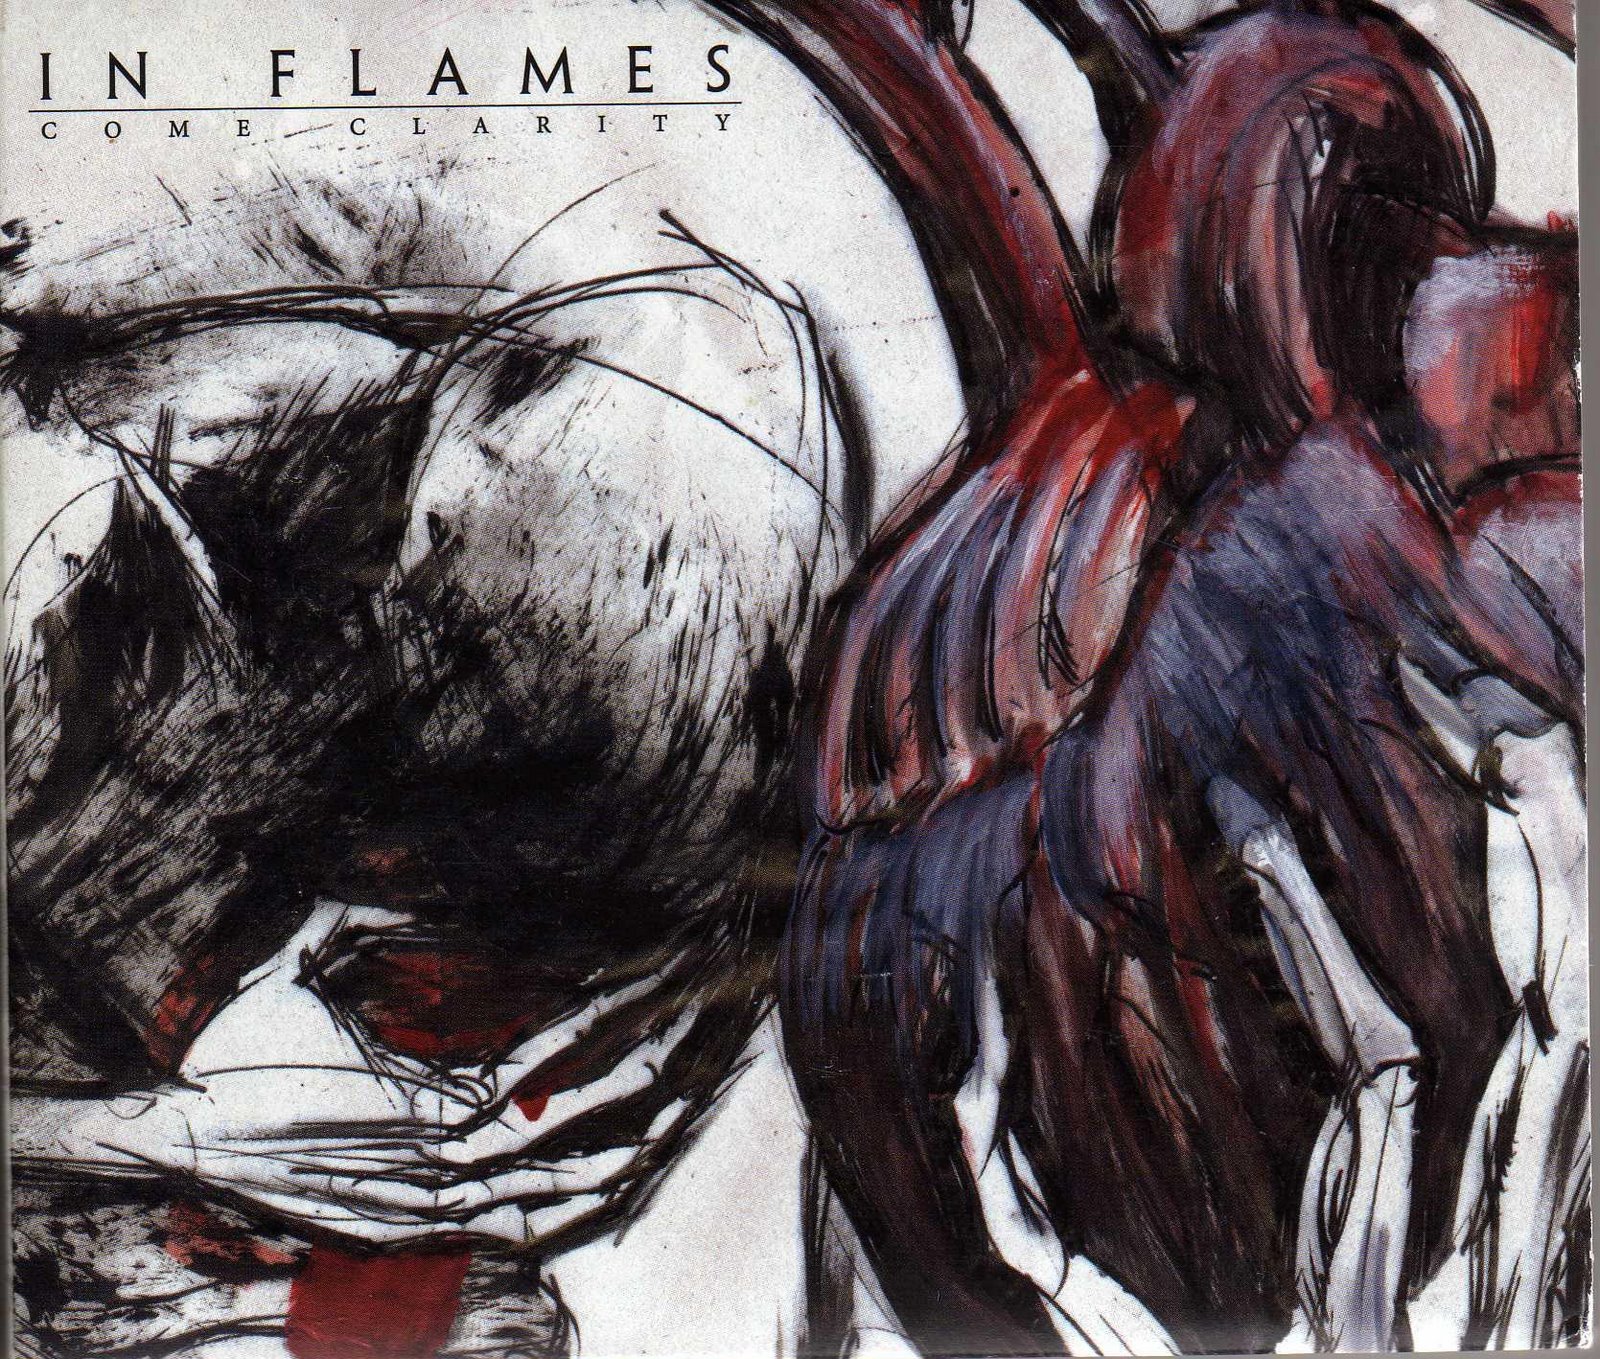 [in+flames+come+clarity.jpg]